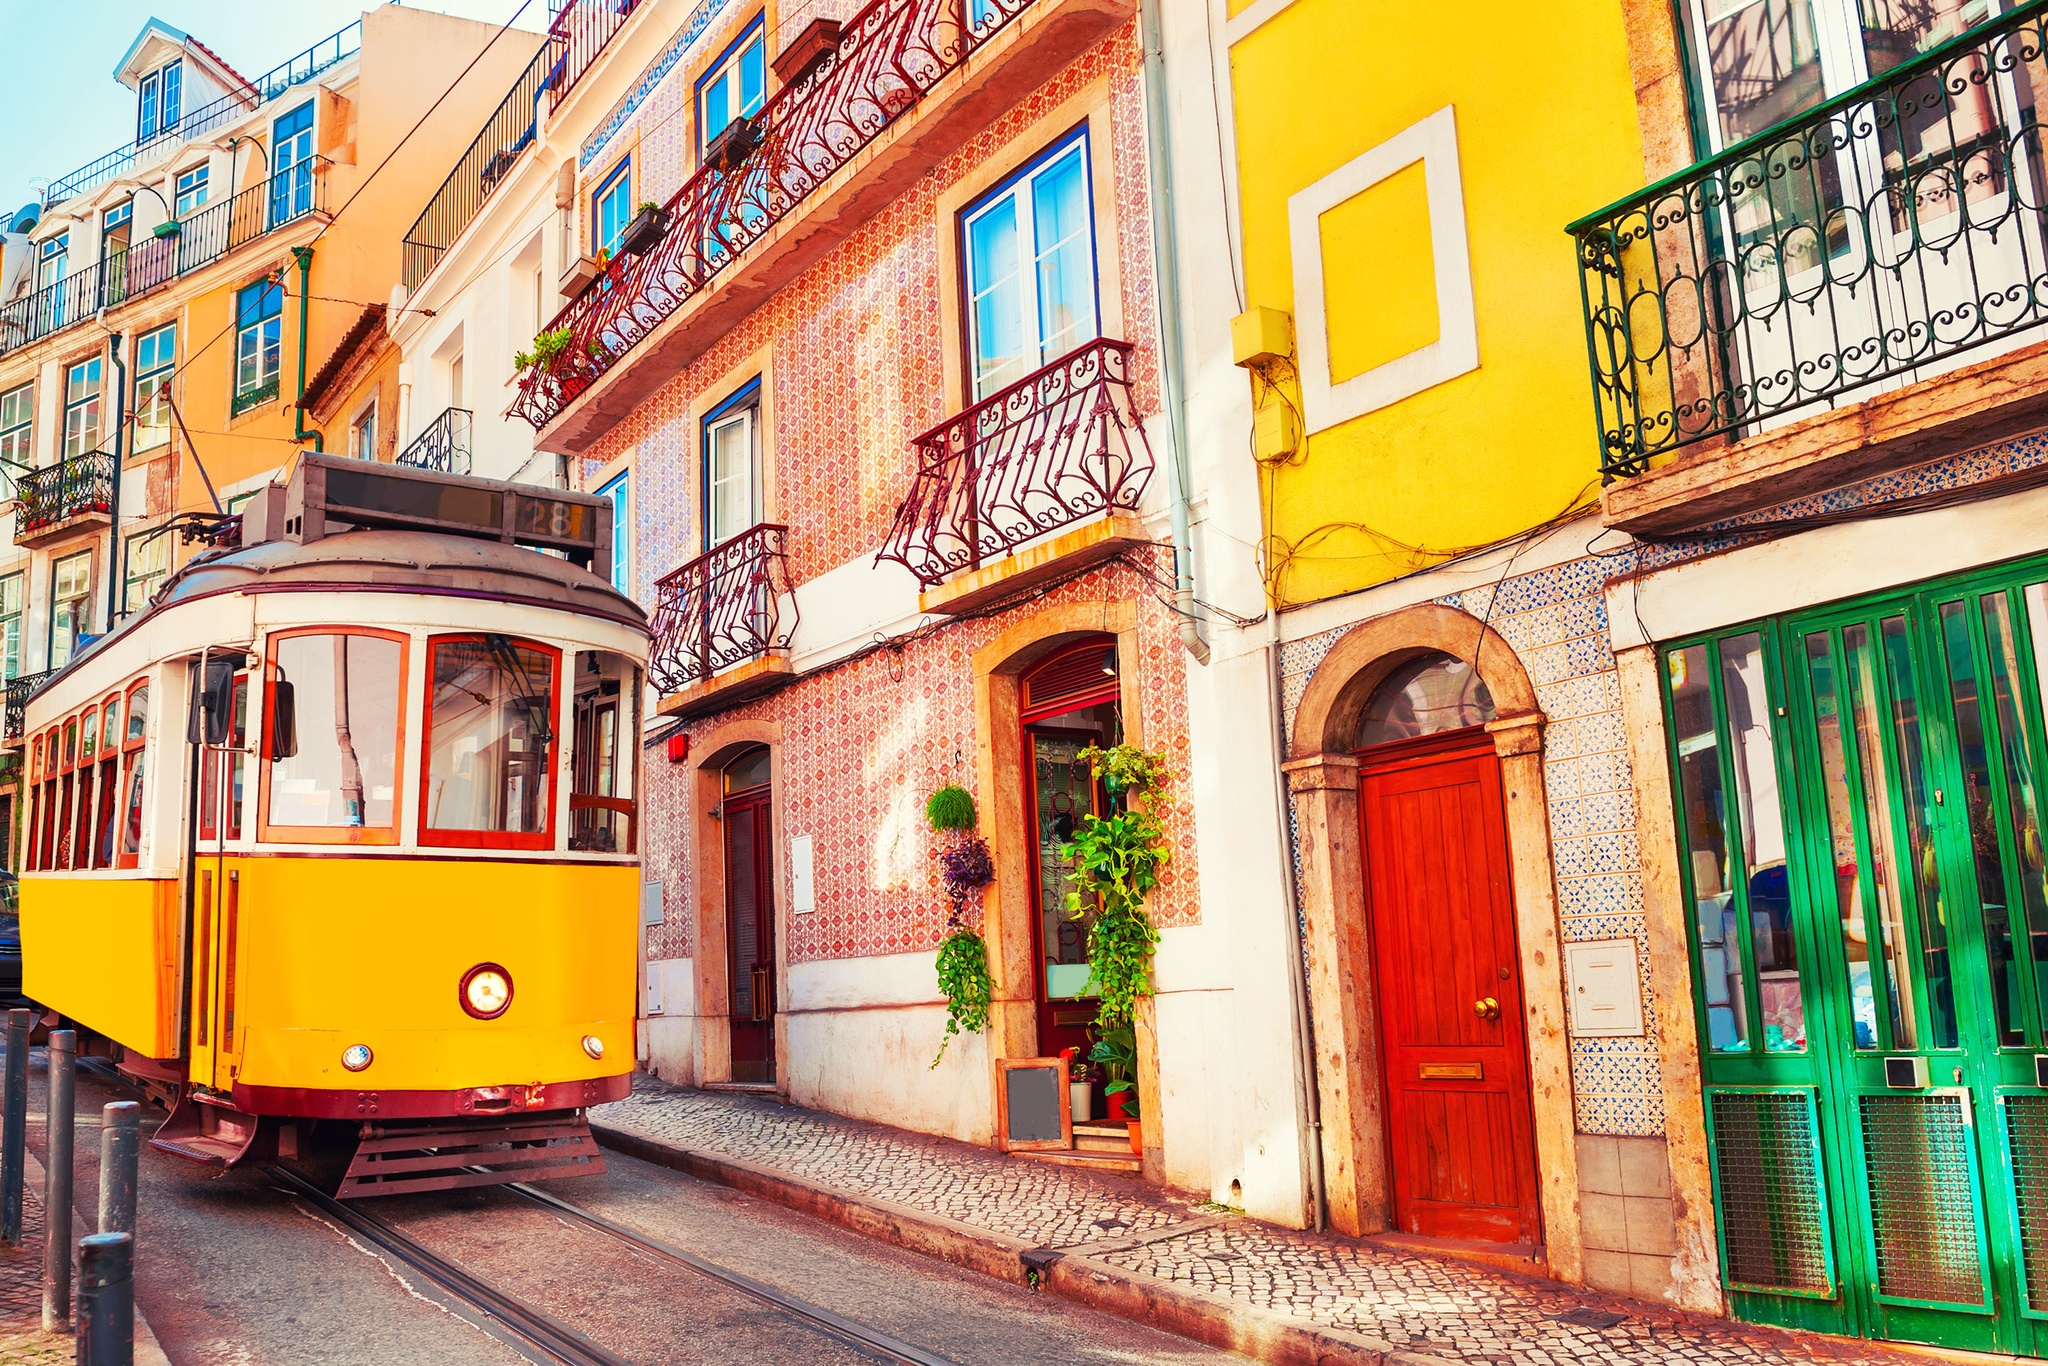 Business Class from Canada to Portugal Nonstop for $1,457 Round Trip on TAP Air Portugal